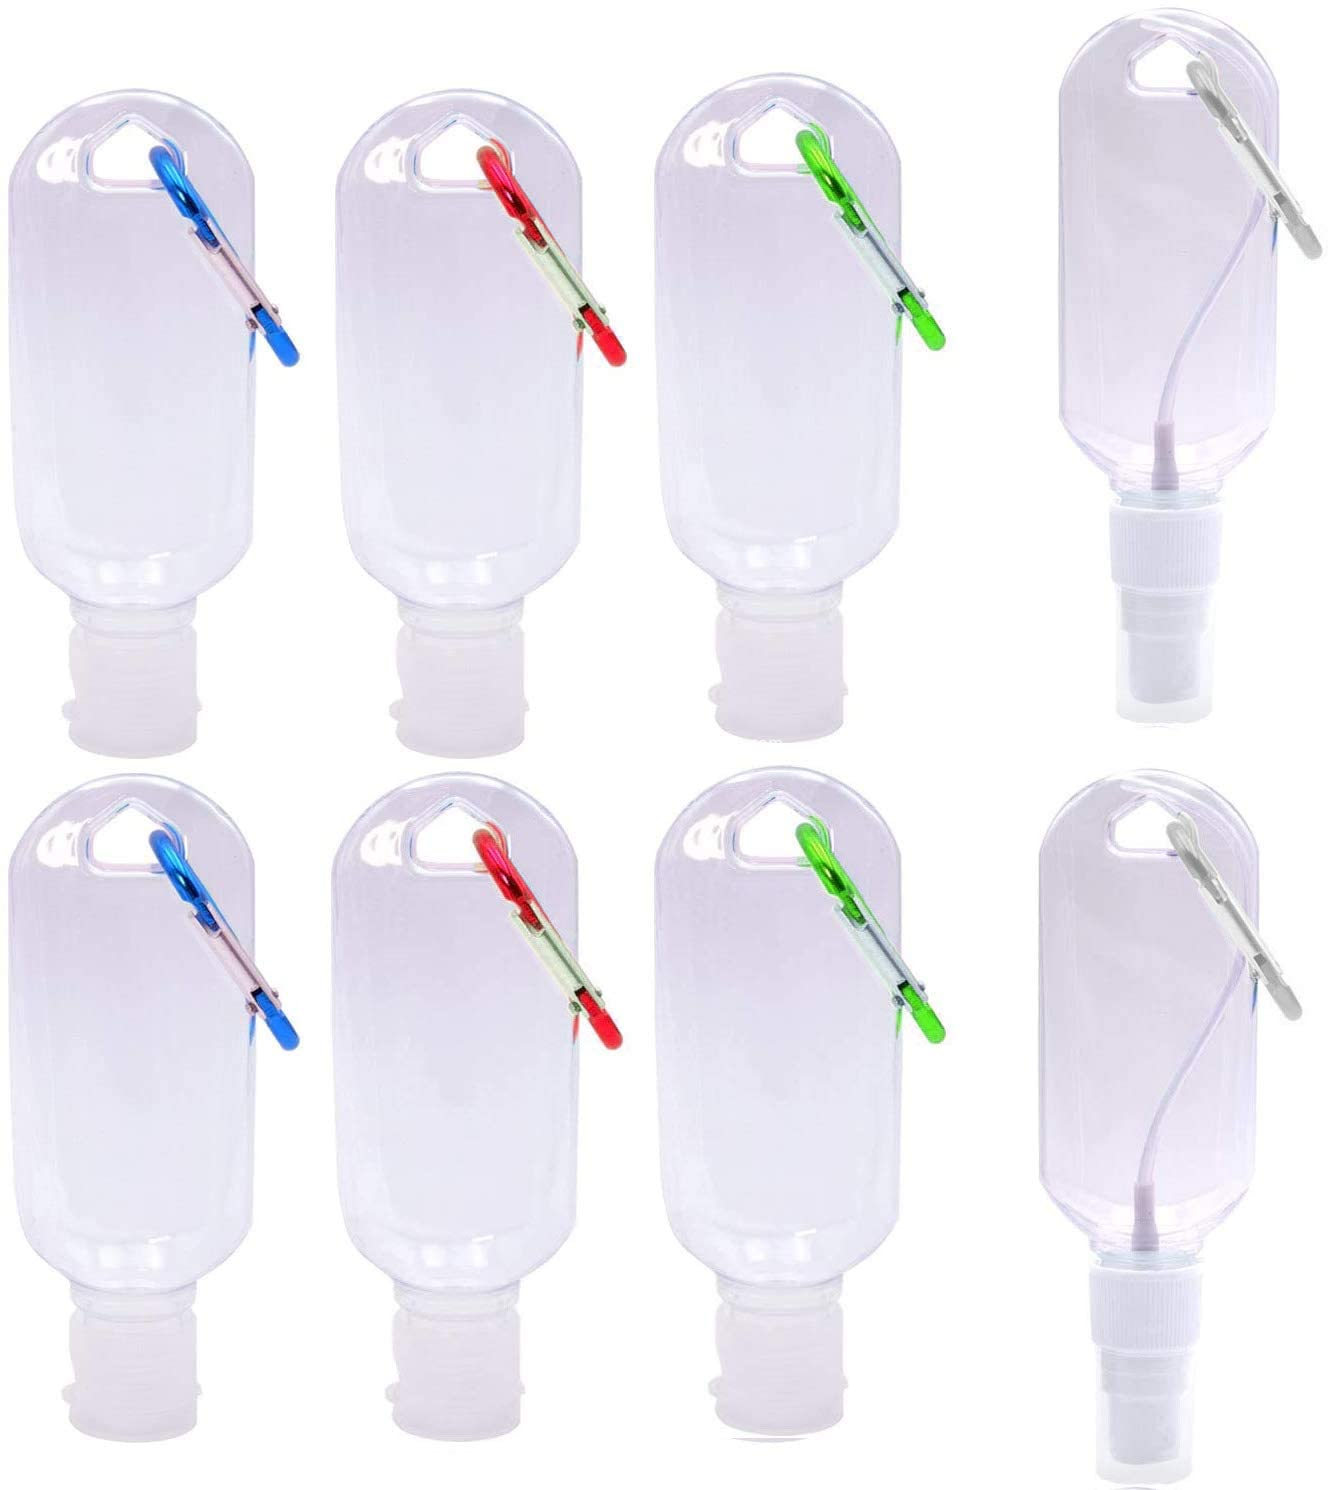 Refillable Hand Sanitizer Bottles with Hook